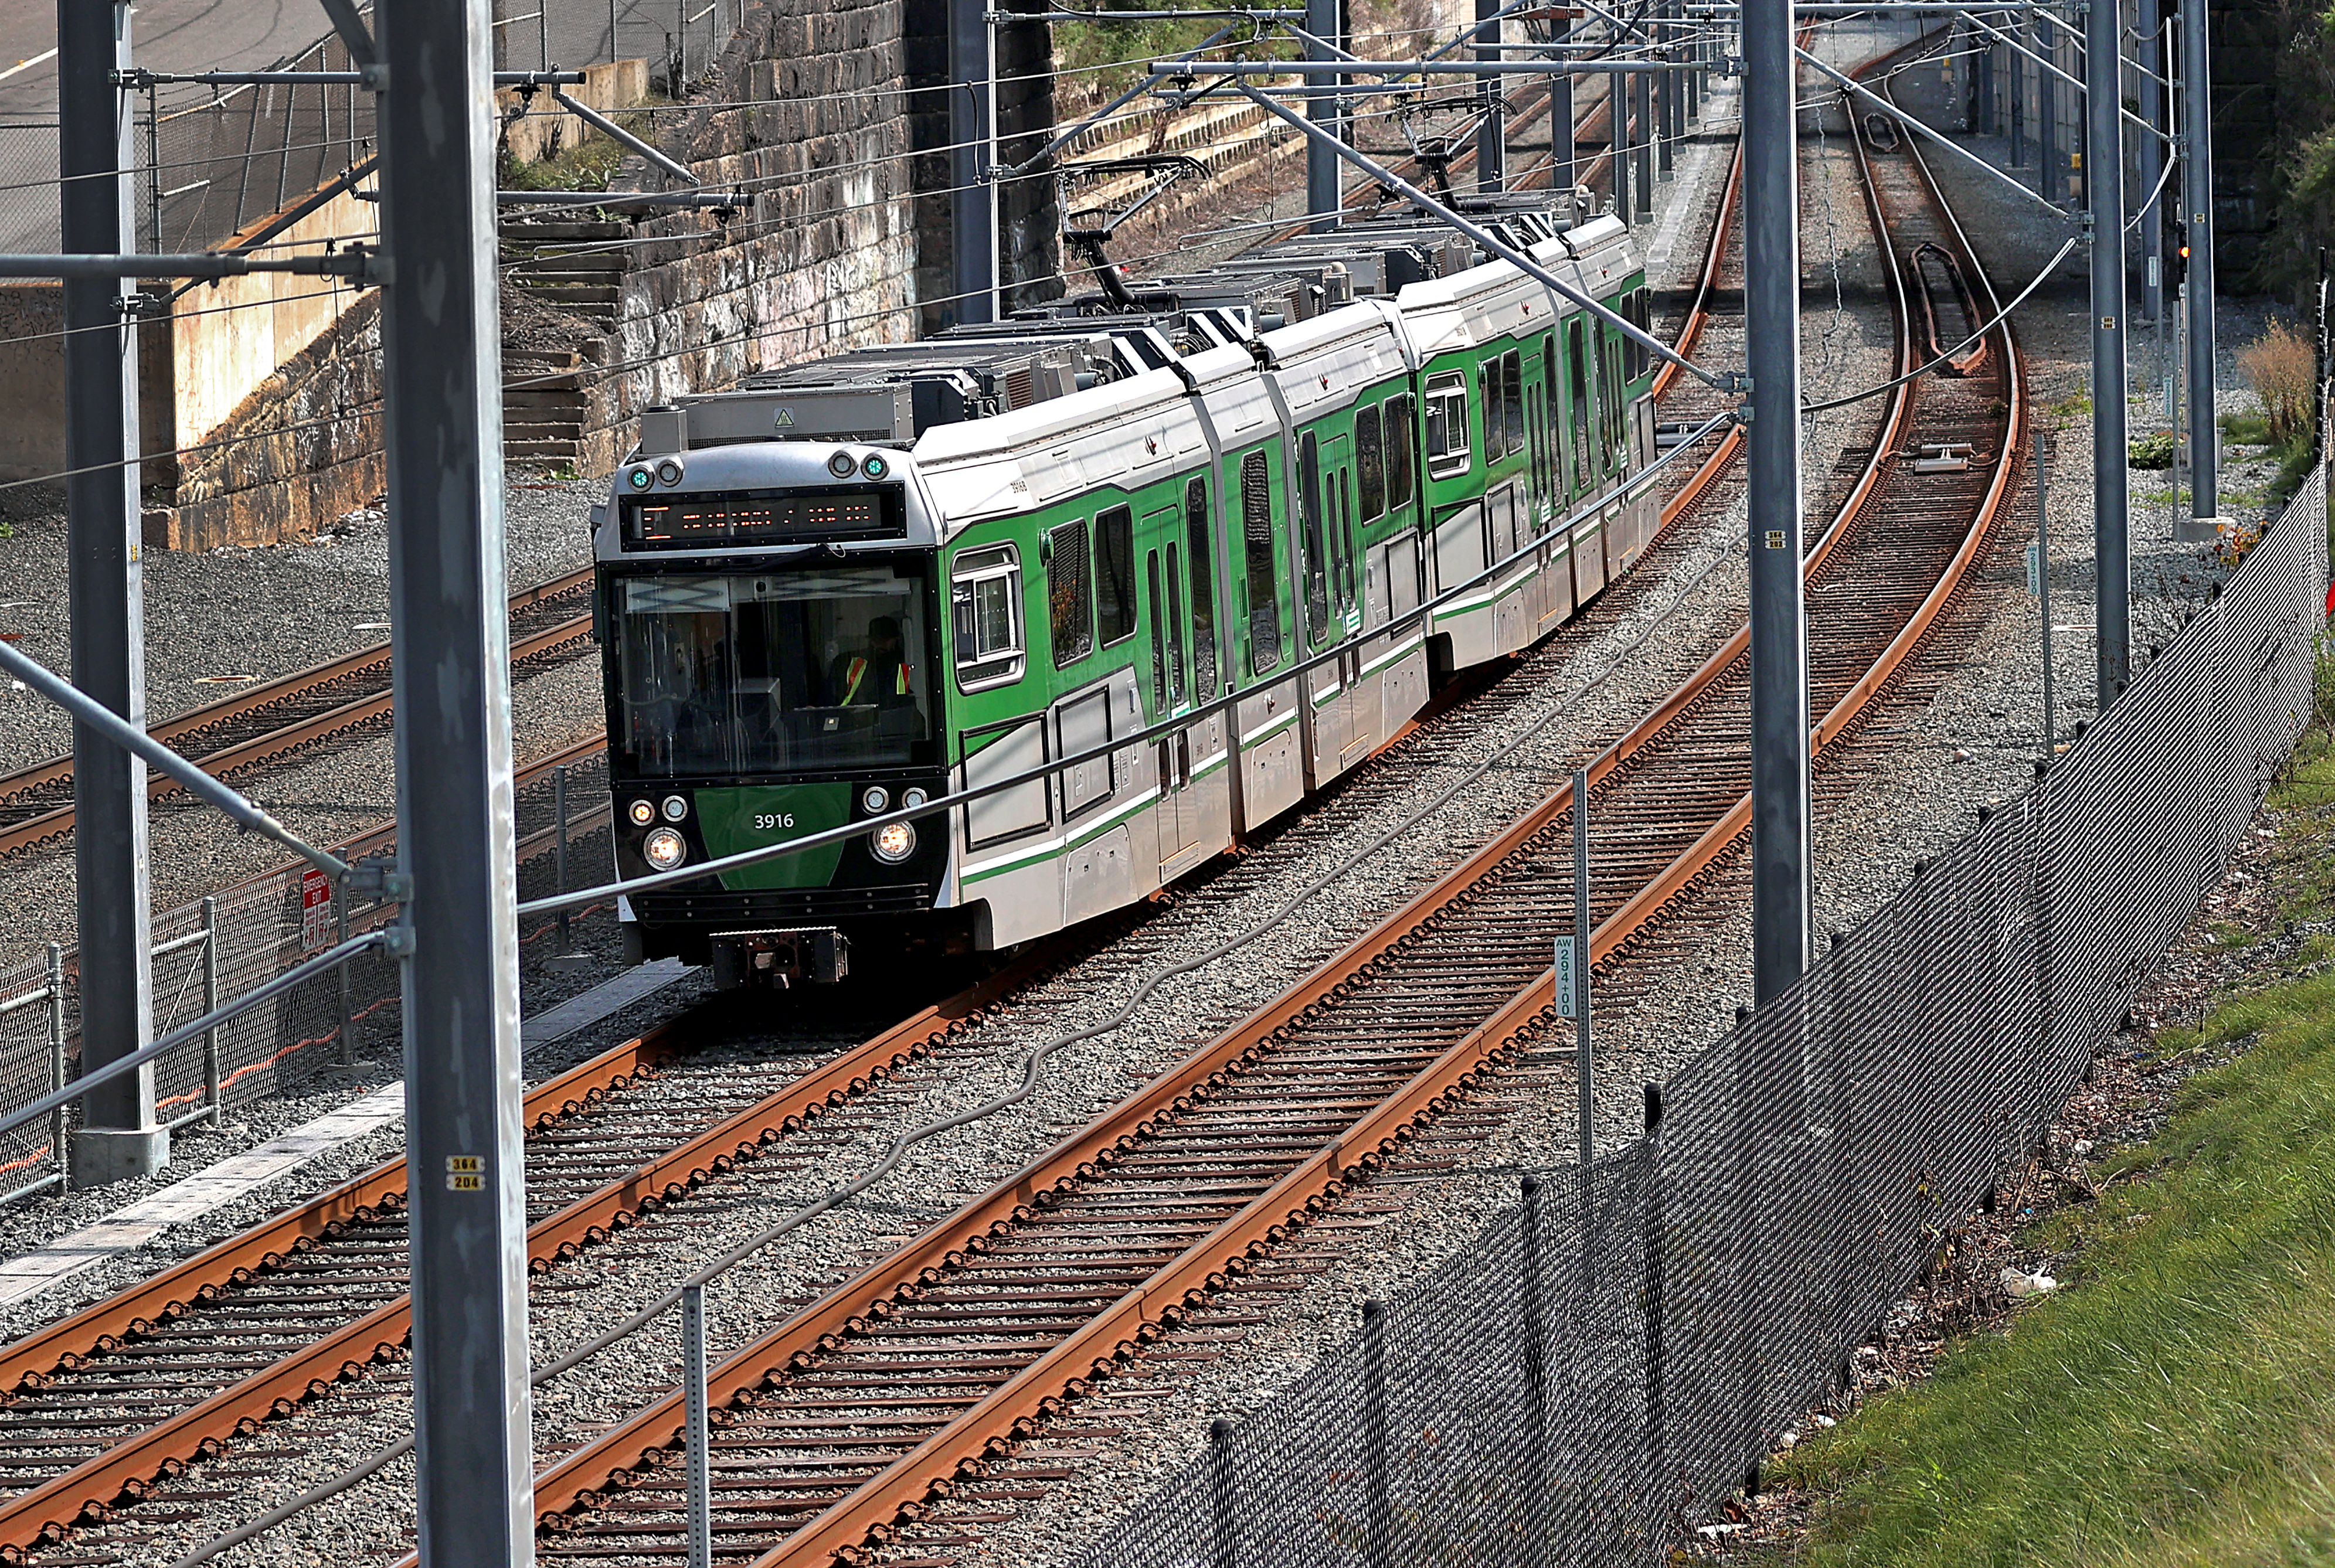 And now . . . the Green Line Extension. For real, this time, the T